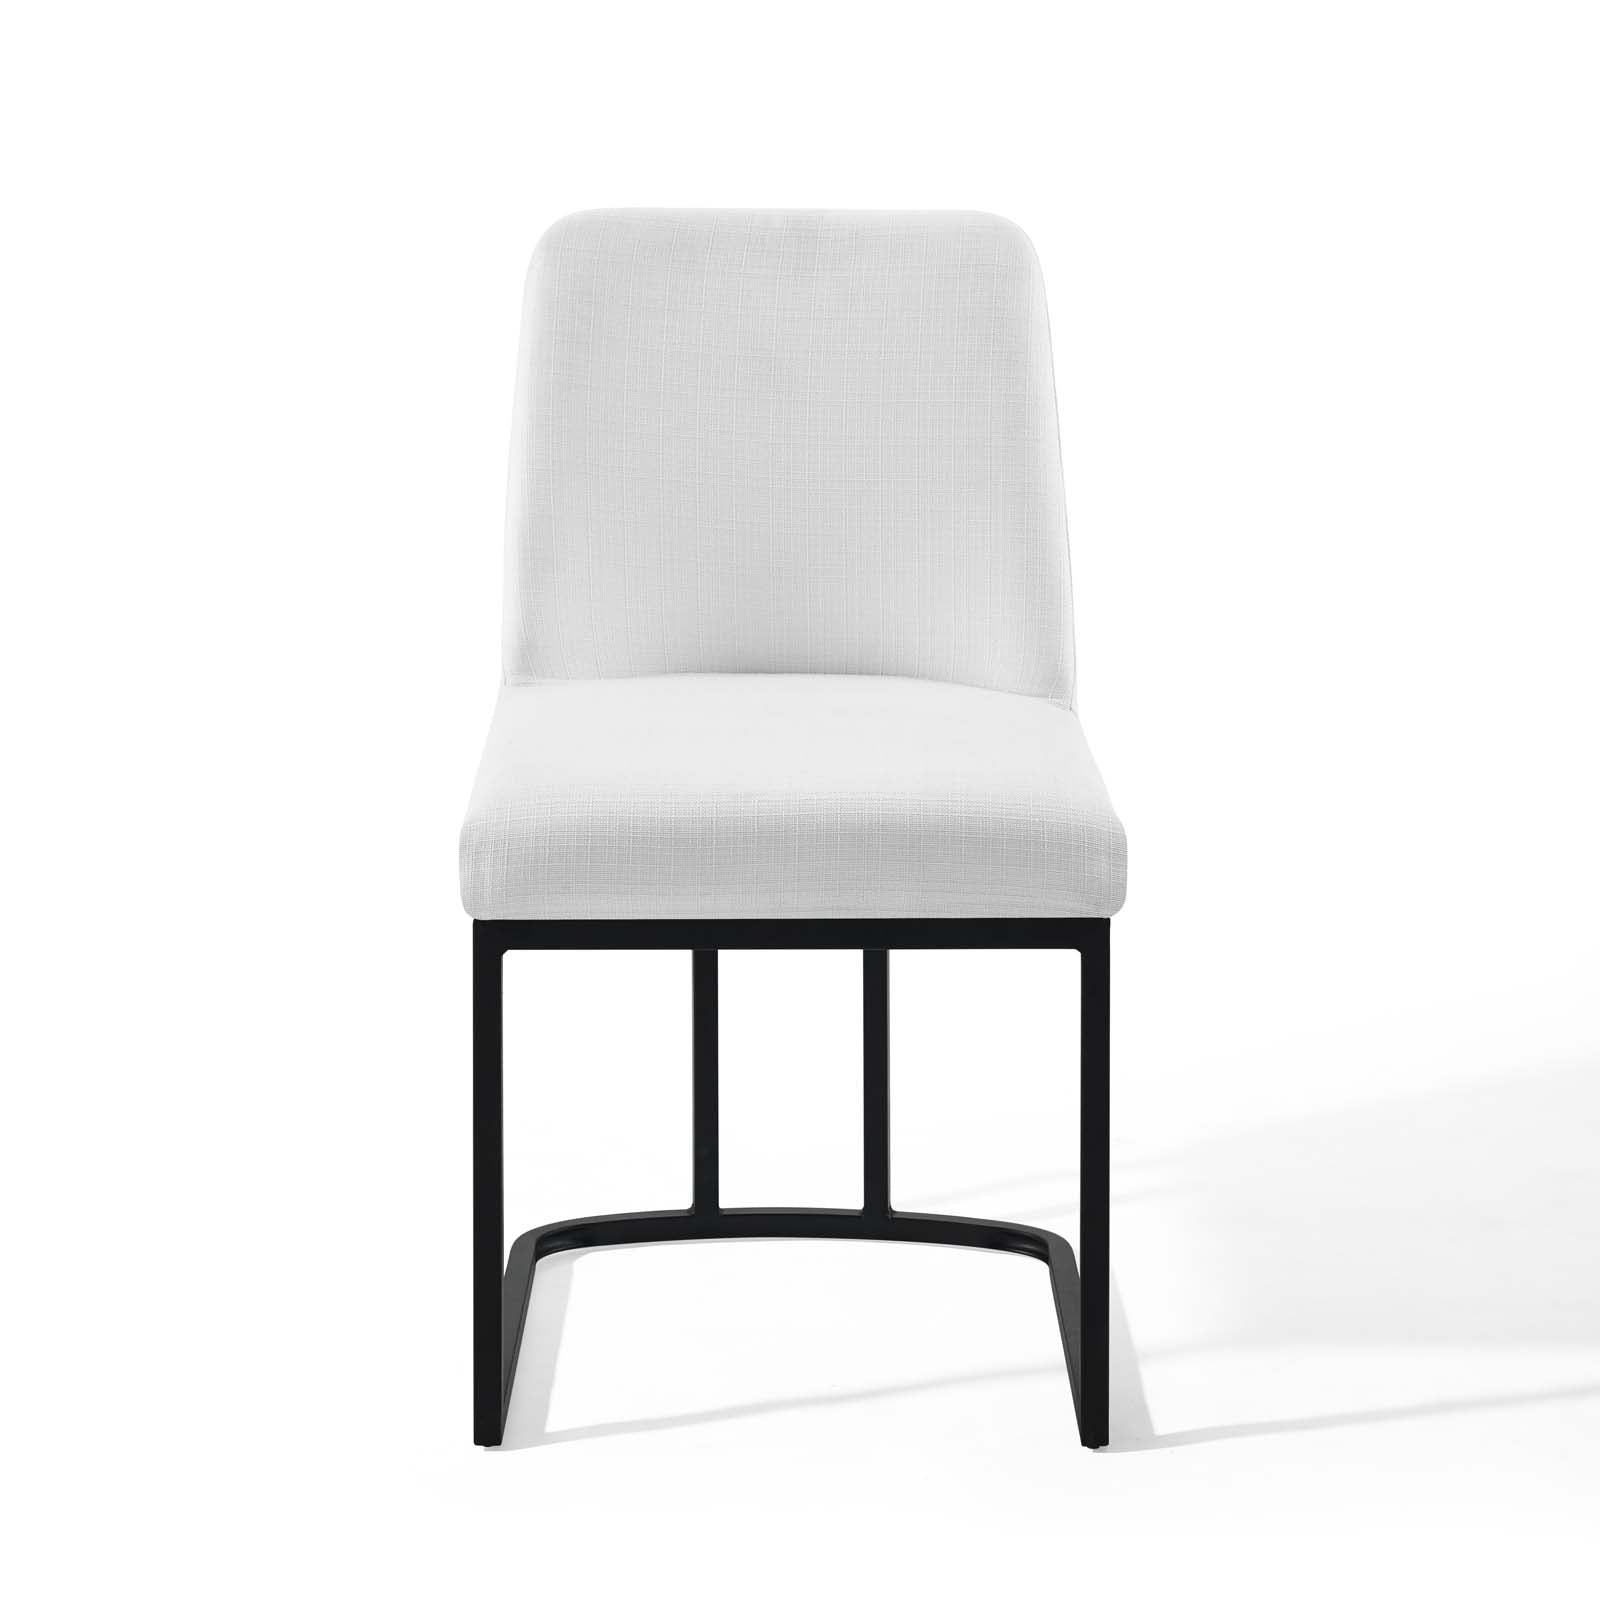 Modway Dining Chairs - Amplify Sled Base Upholstered Fabric Dining Chairs - ( Set of 2 ) Black White